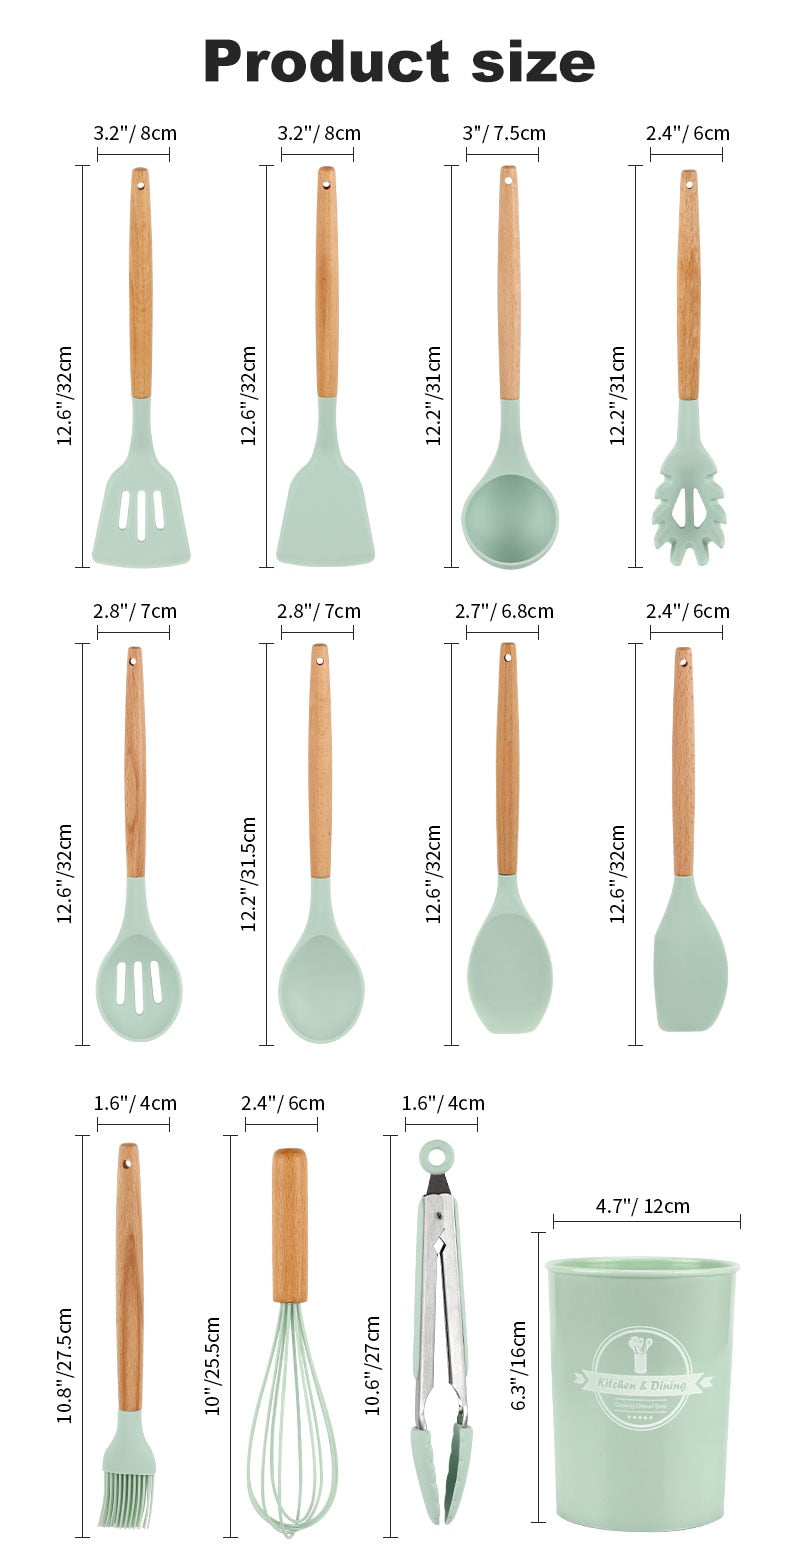 Non-Stick Silicone Kitchen Utensils Set with Wooden Handles - Includes Spatula, Egg Beaters, and More - Essential Kitchenware and Accessories